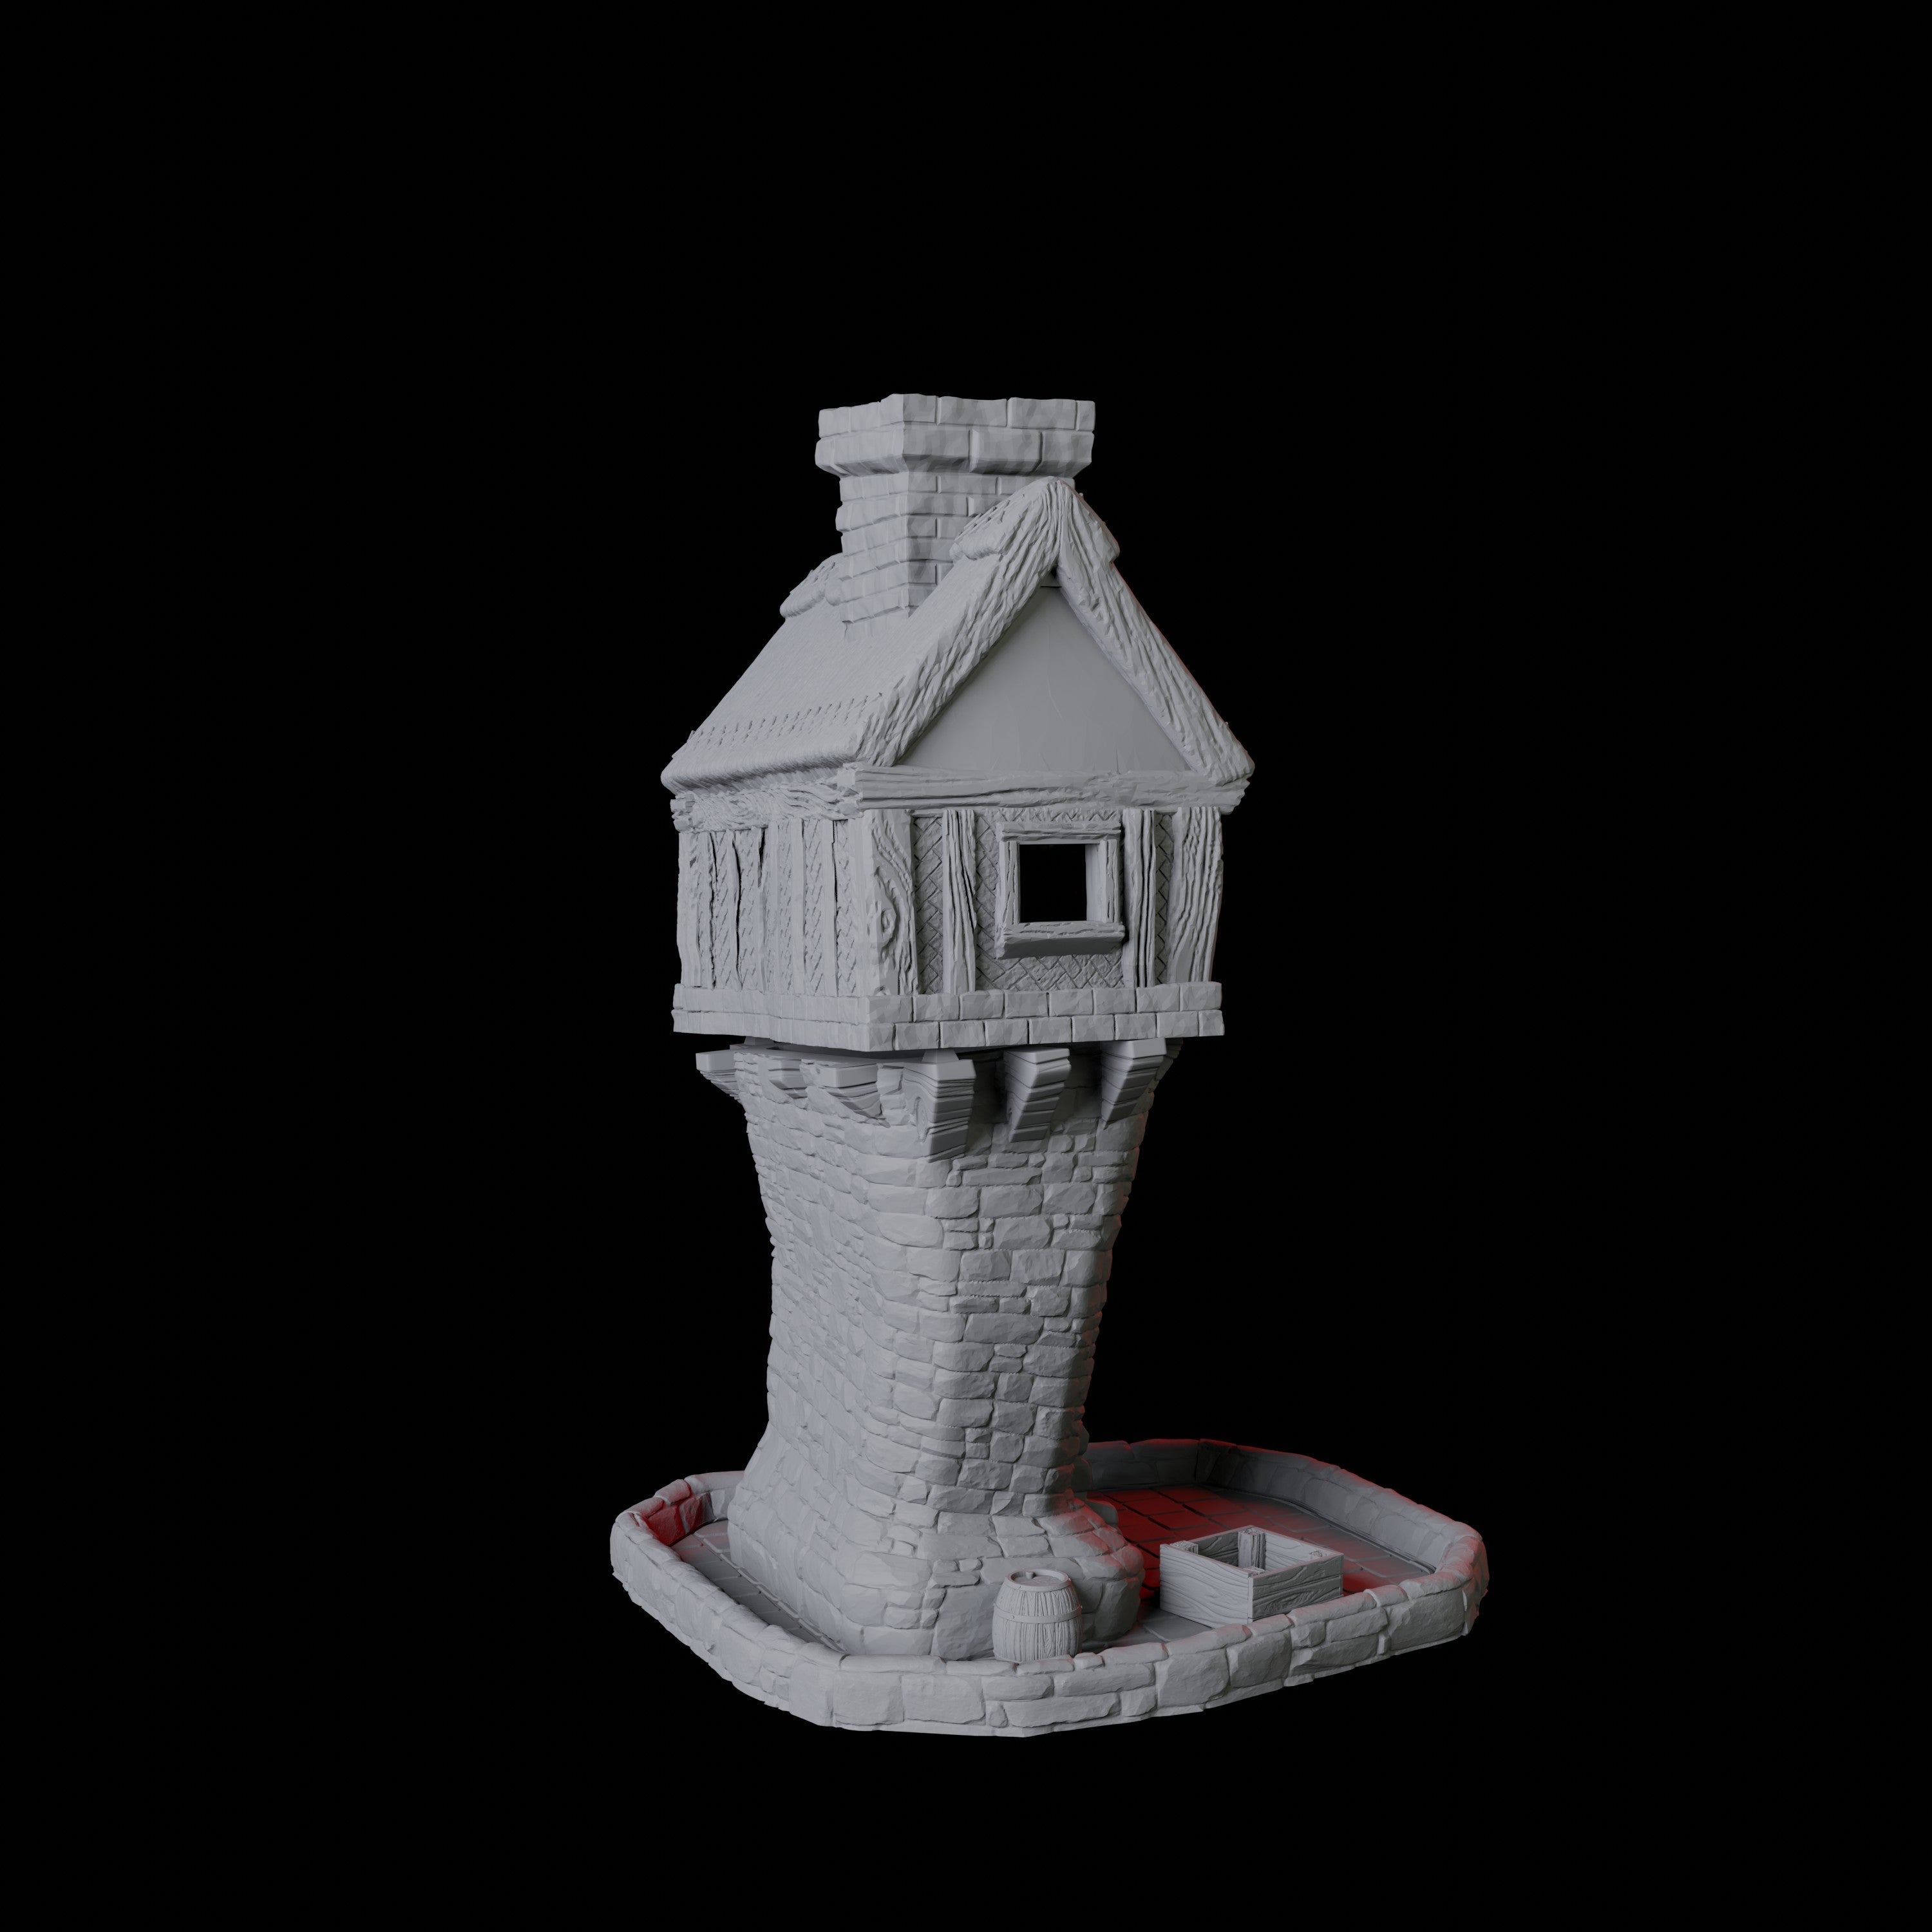 Thatched Cottage Dice Tower Miniature for Dungeons and Dragons